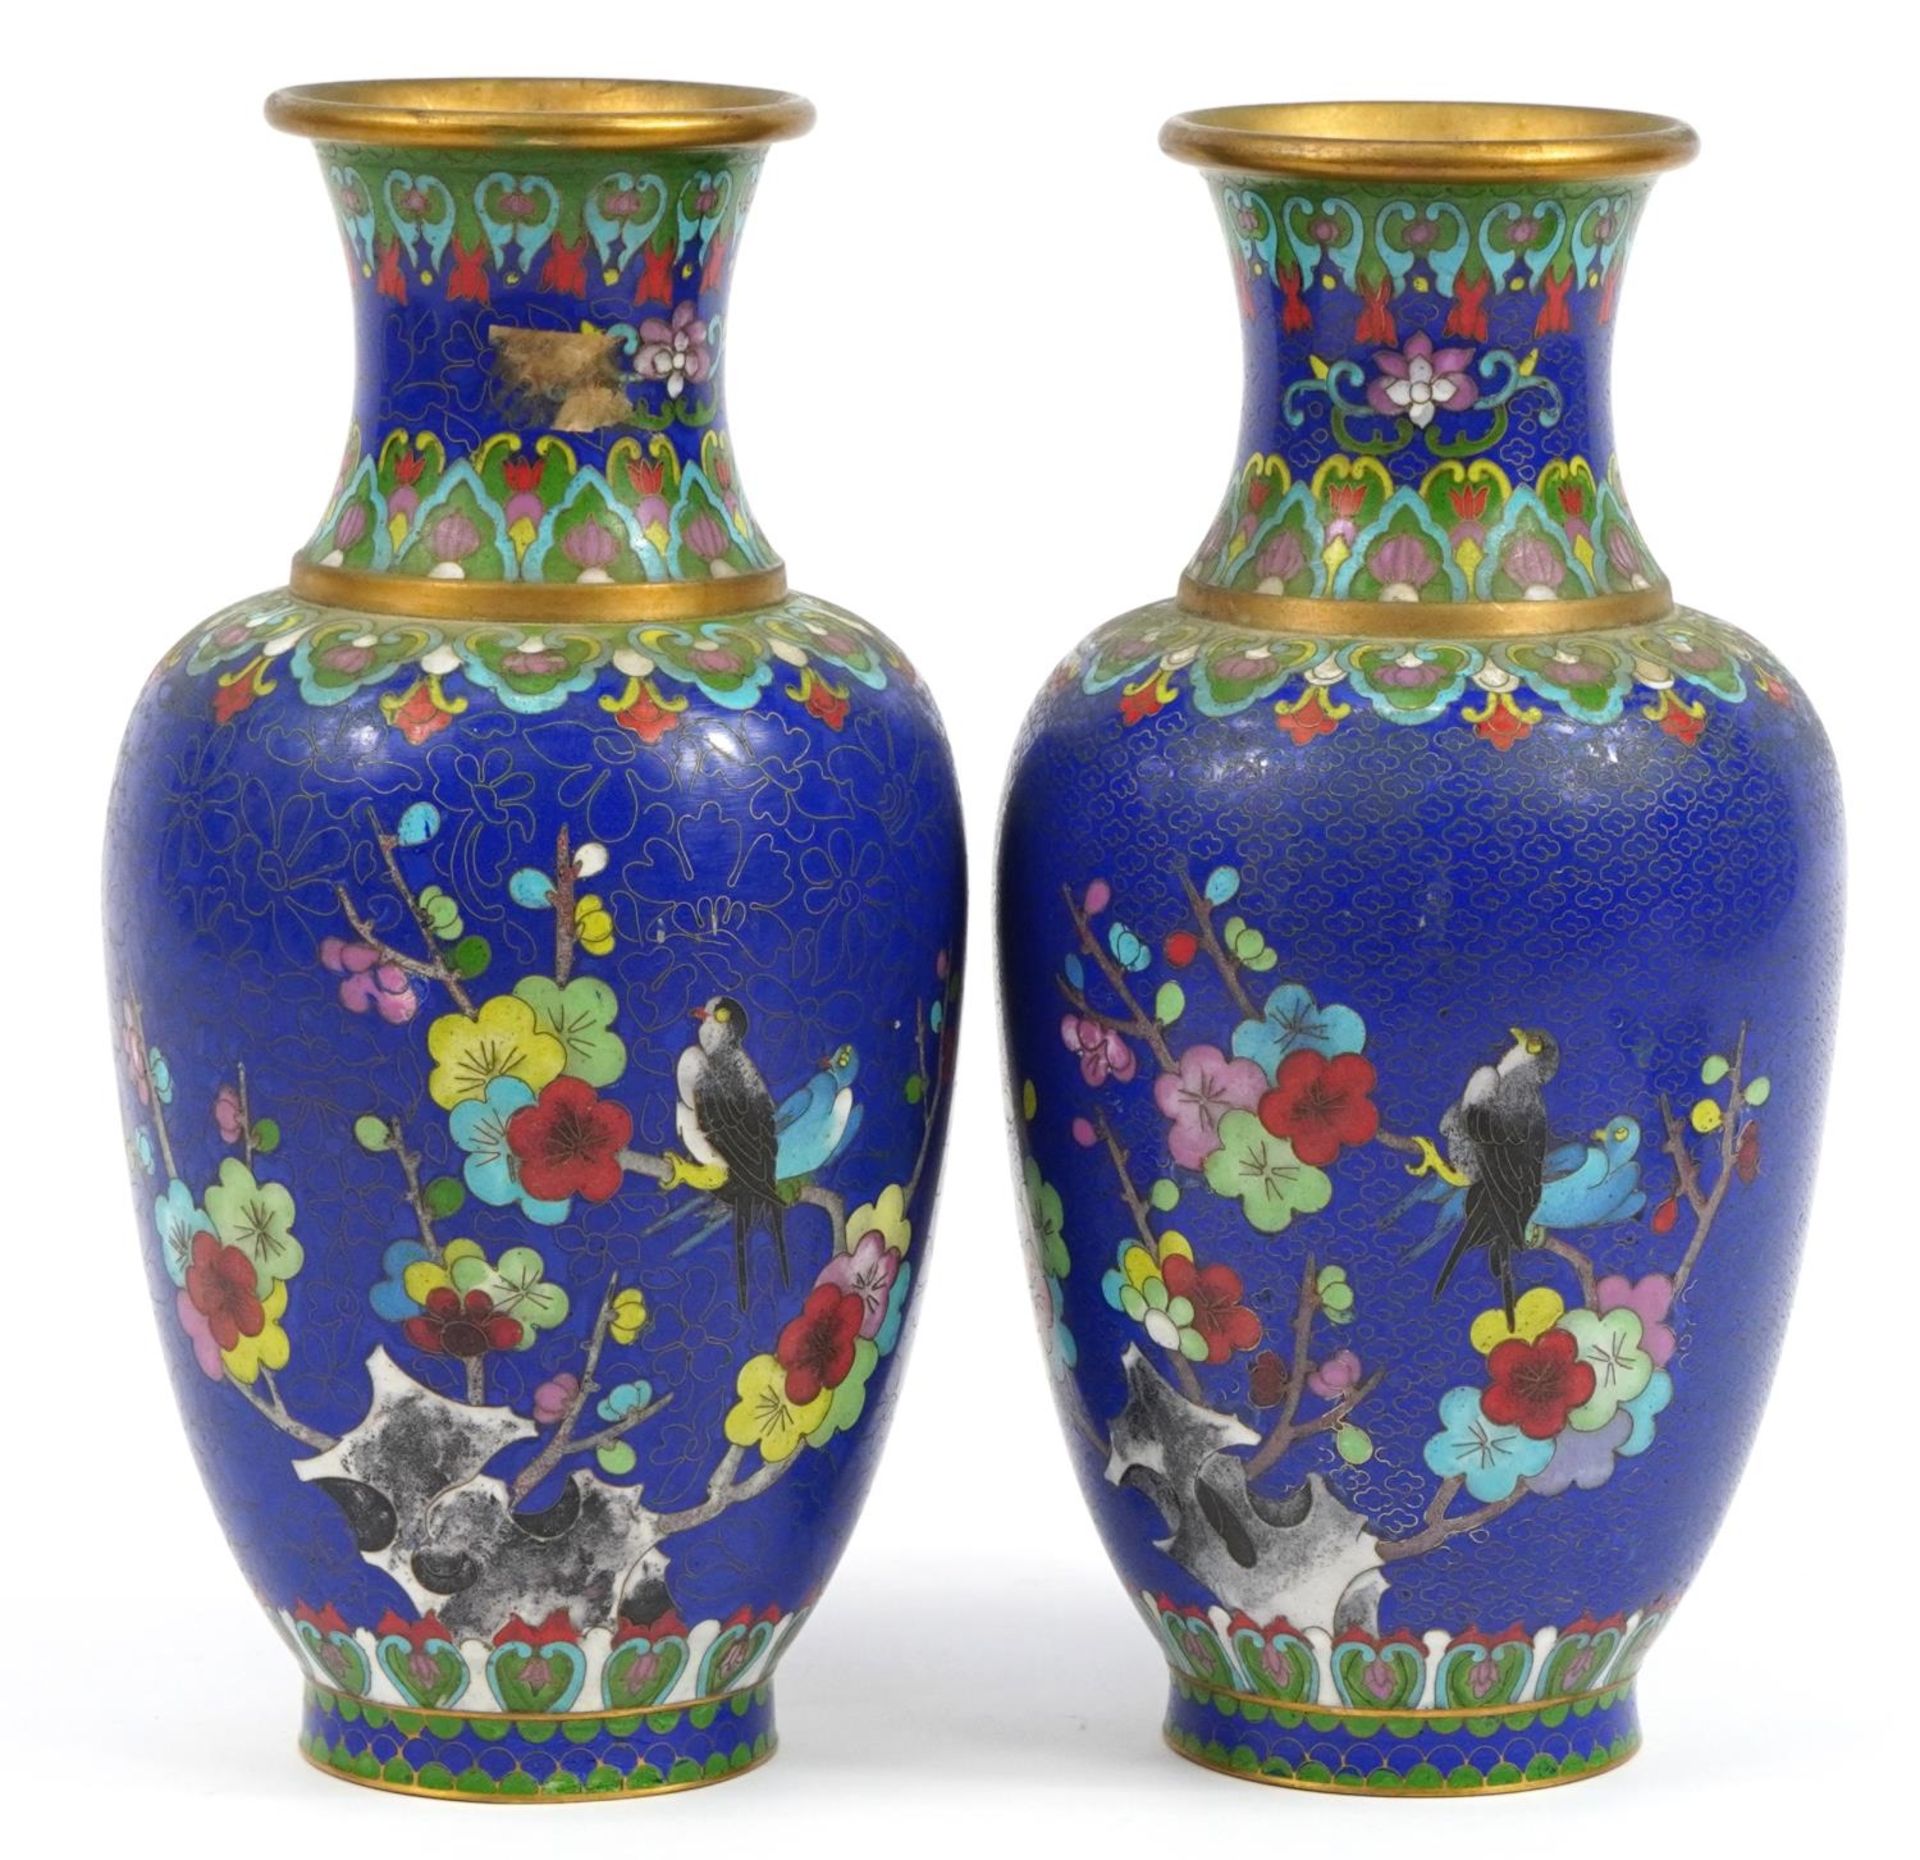 Pair of Chinese cloisonne vases enamelled with birds amongst flowers, each 31cm high